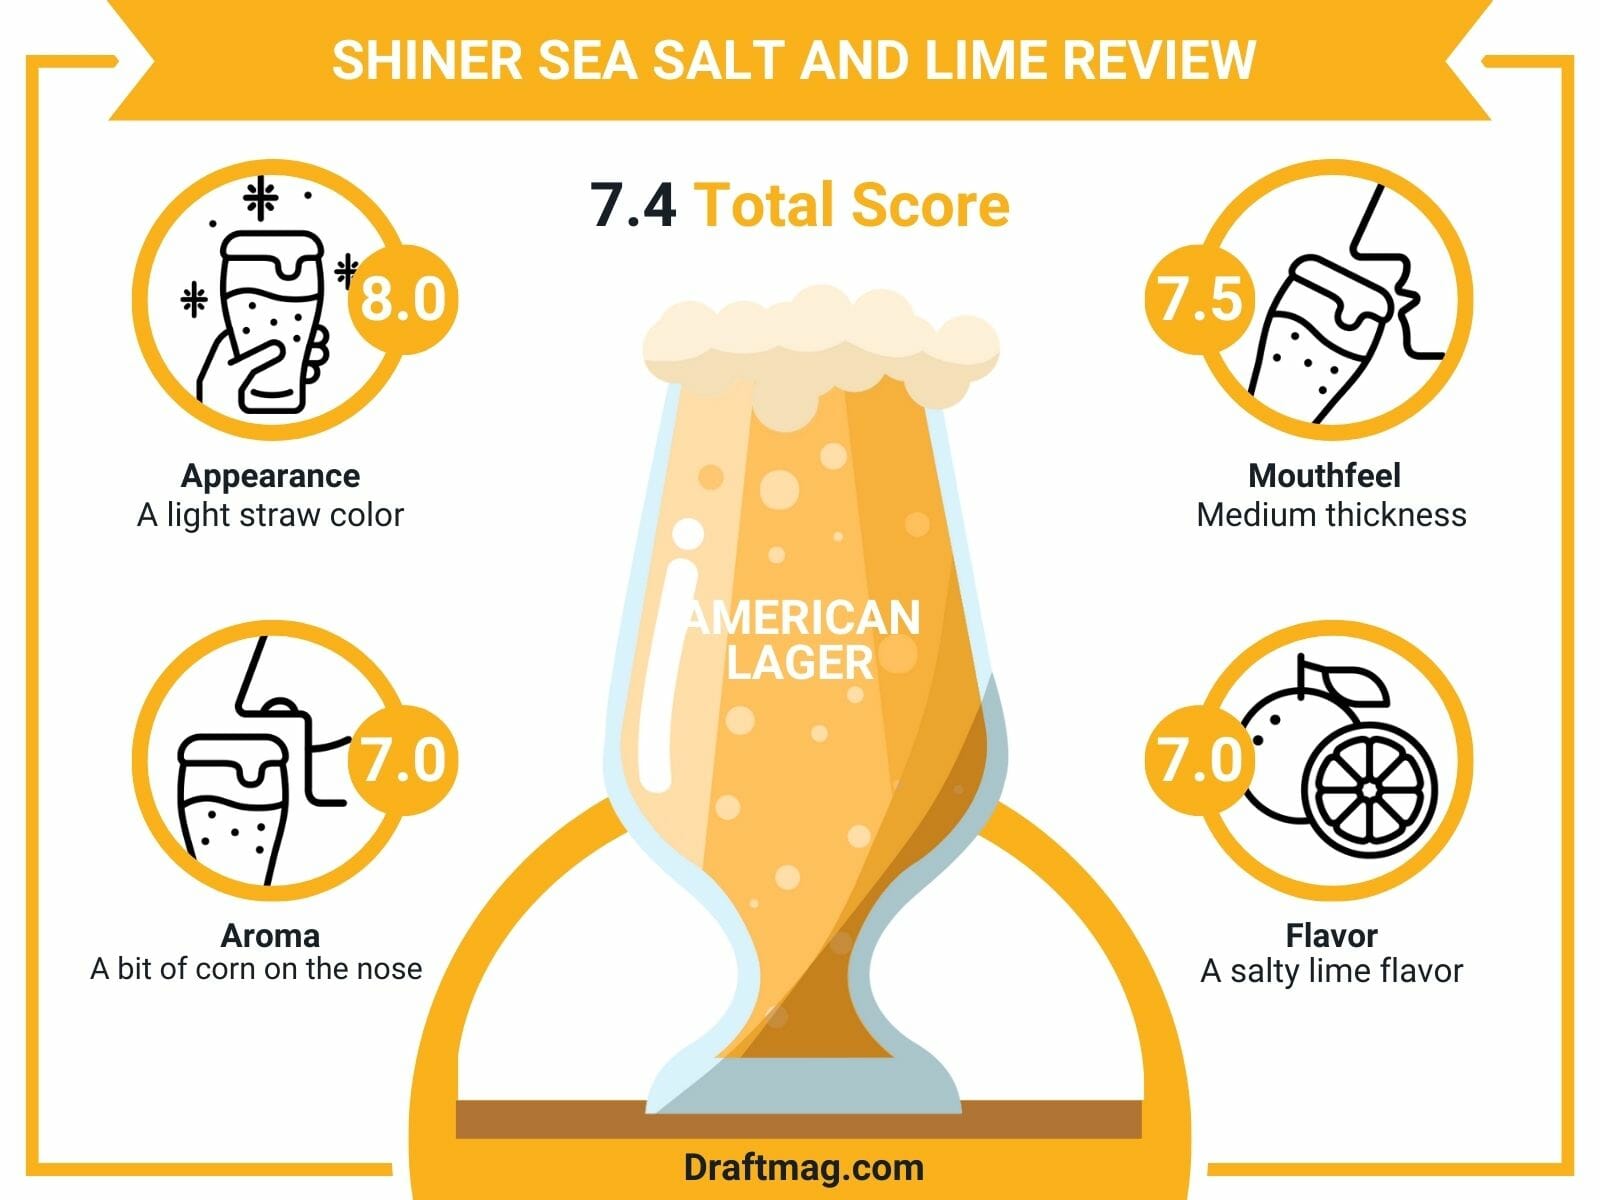 Shiner Sea Salt and Lime Review Infographic